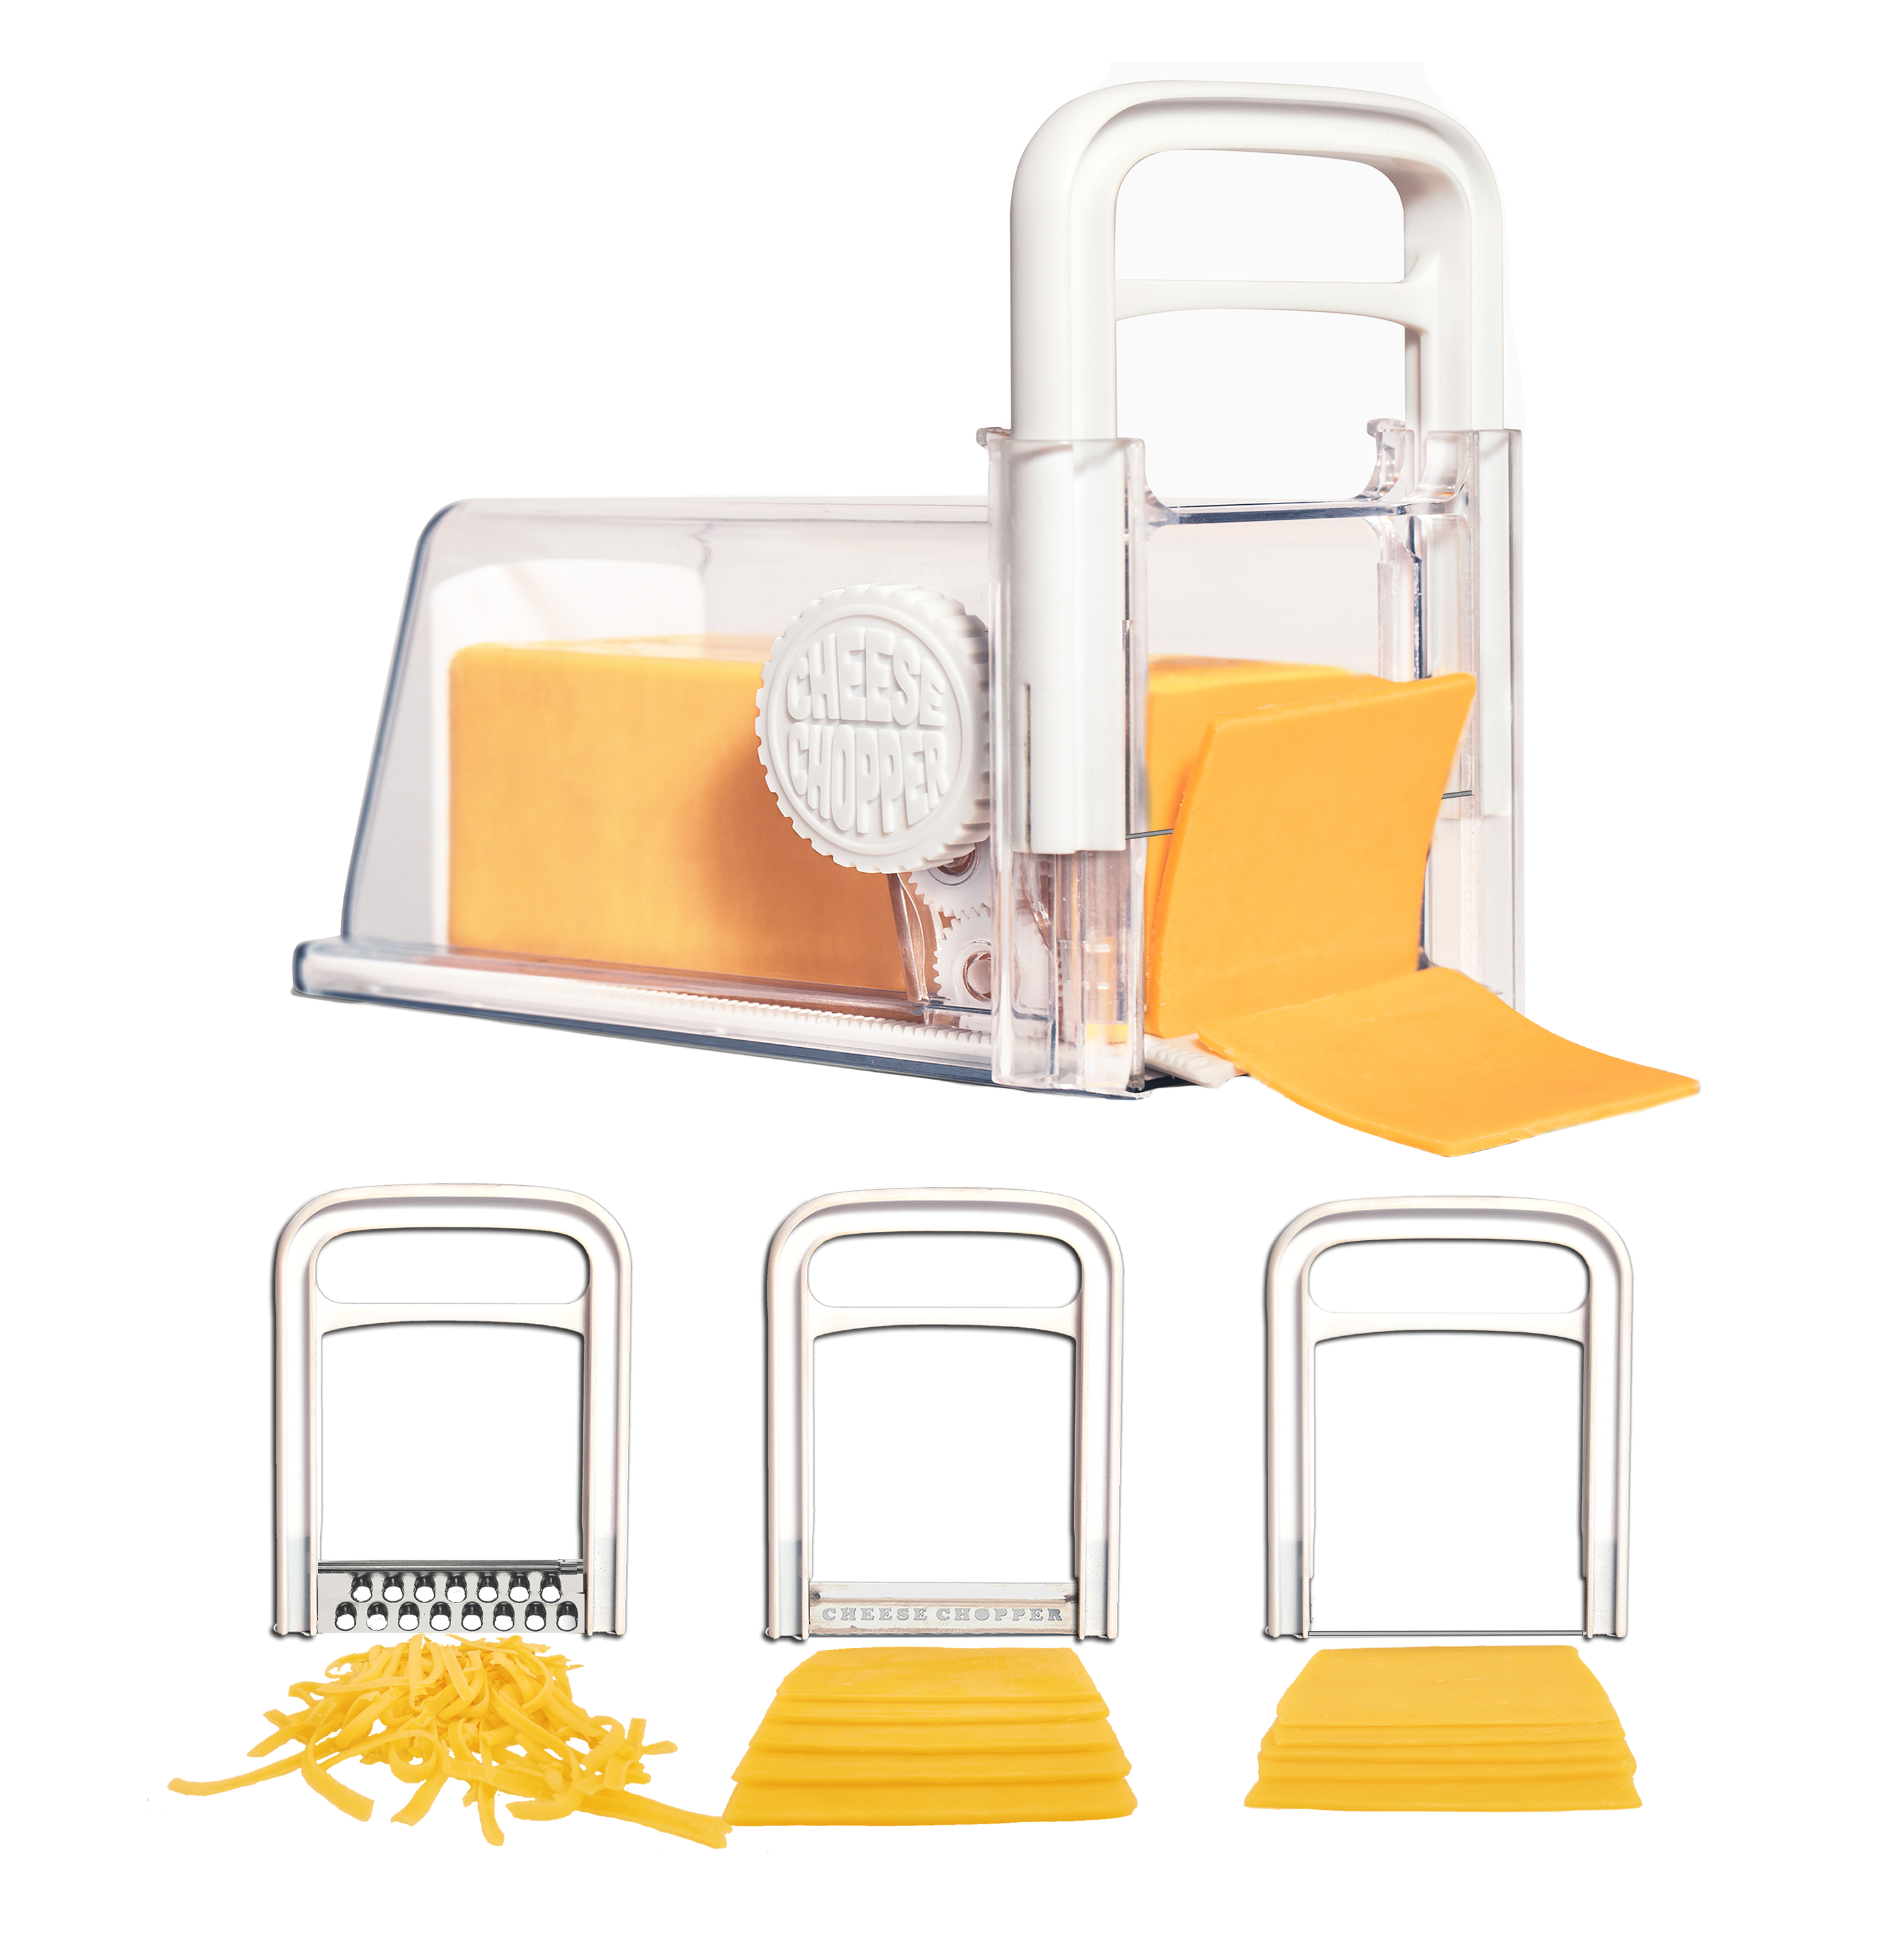 Have you seen #TheCheeseChopper?! 👀 🧀 It's the world's best cheese device  that slices, shreds and stores your cheese with ease. 😉 Order on  .com:, By The Cheese Chopper